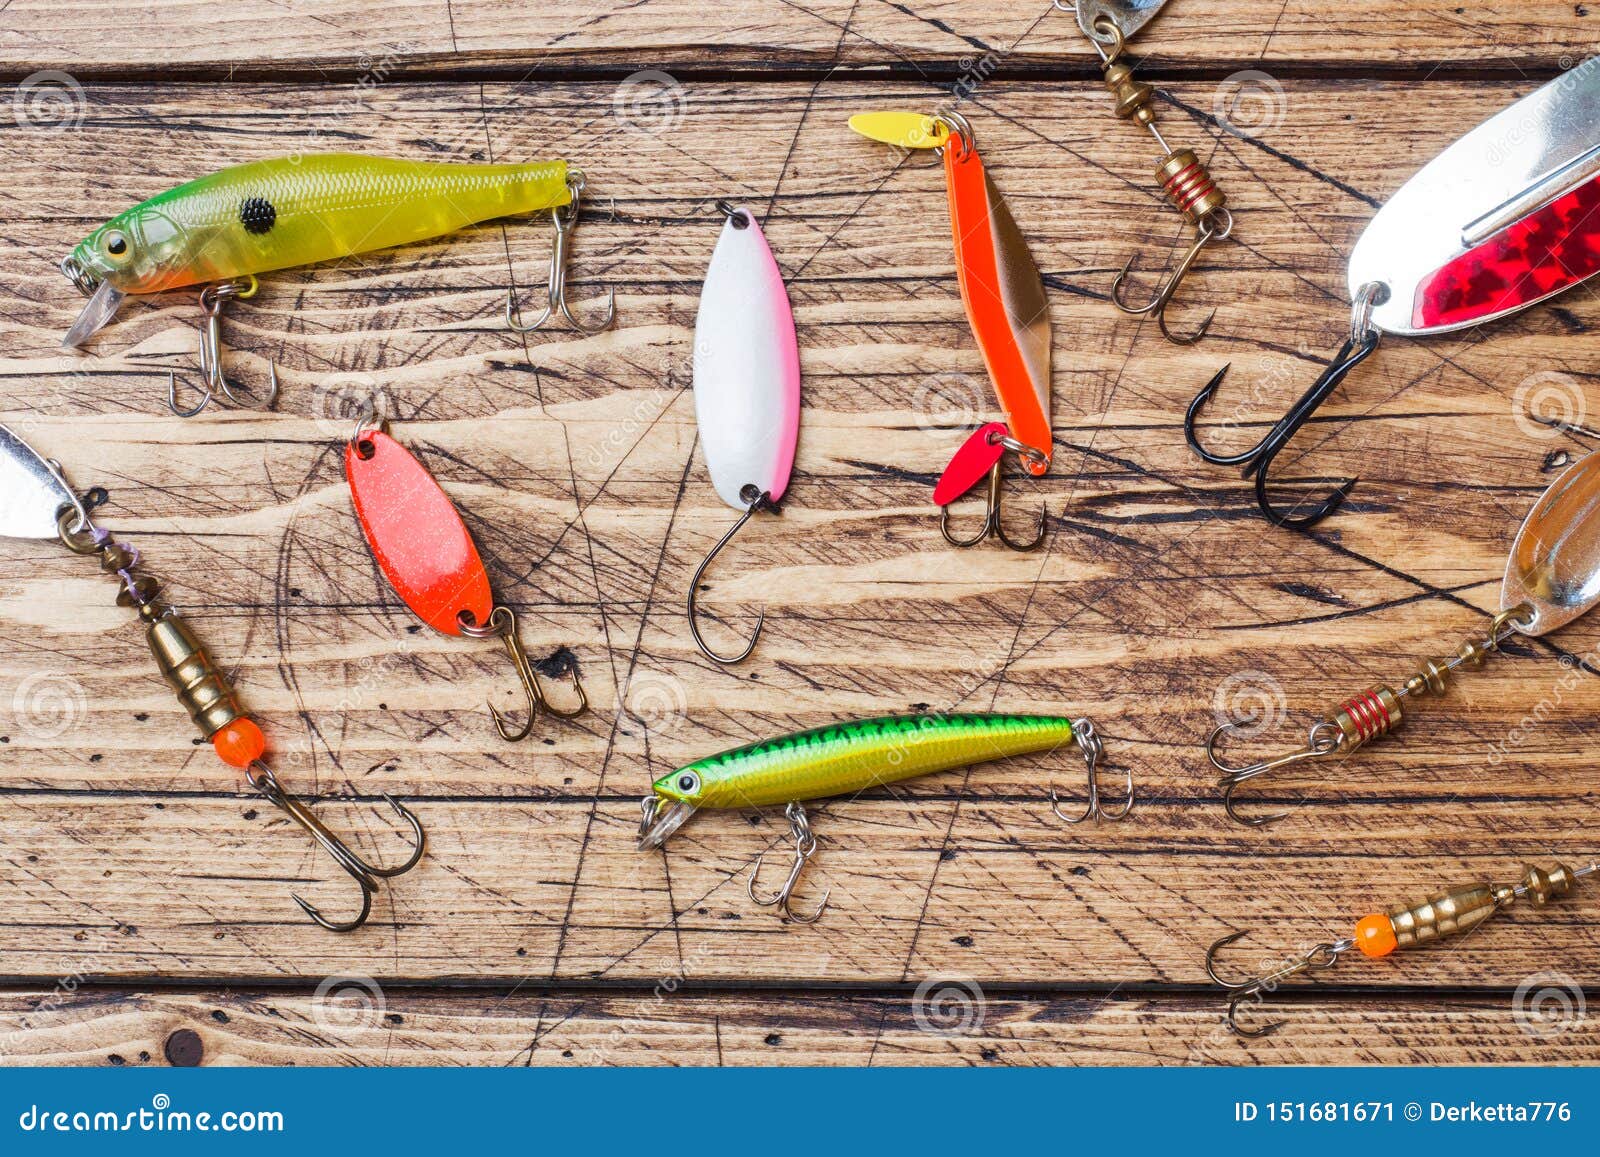 Fishing Hooks and Baits in a Set for Catching Different Fish on a